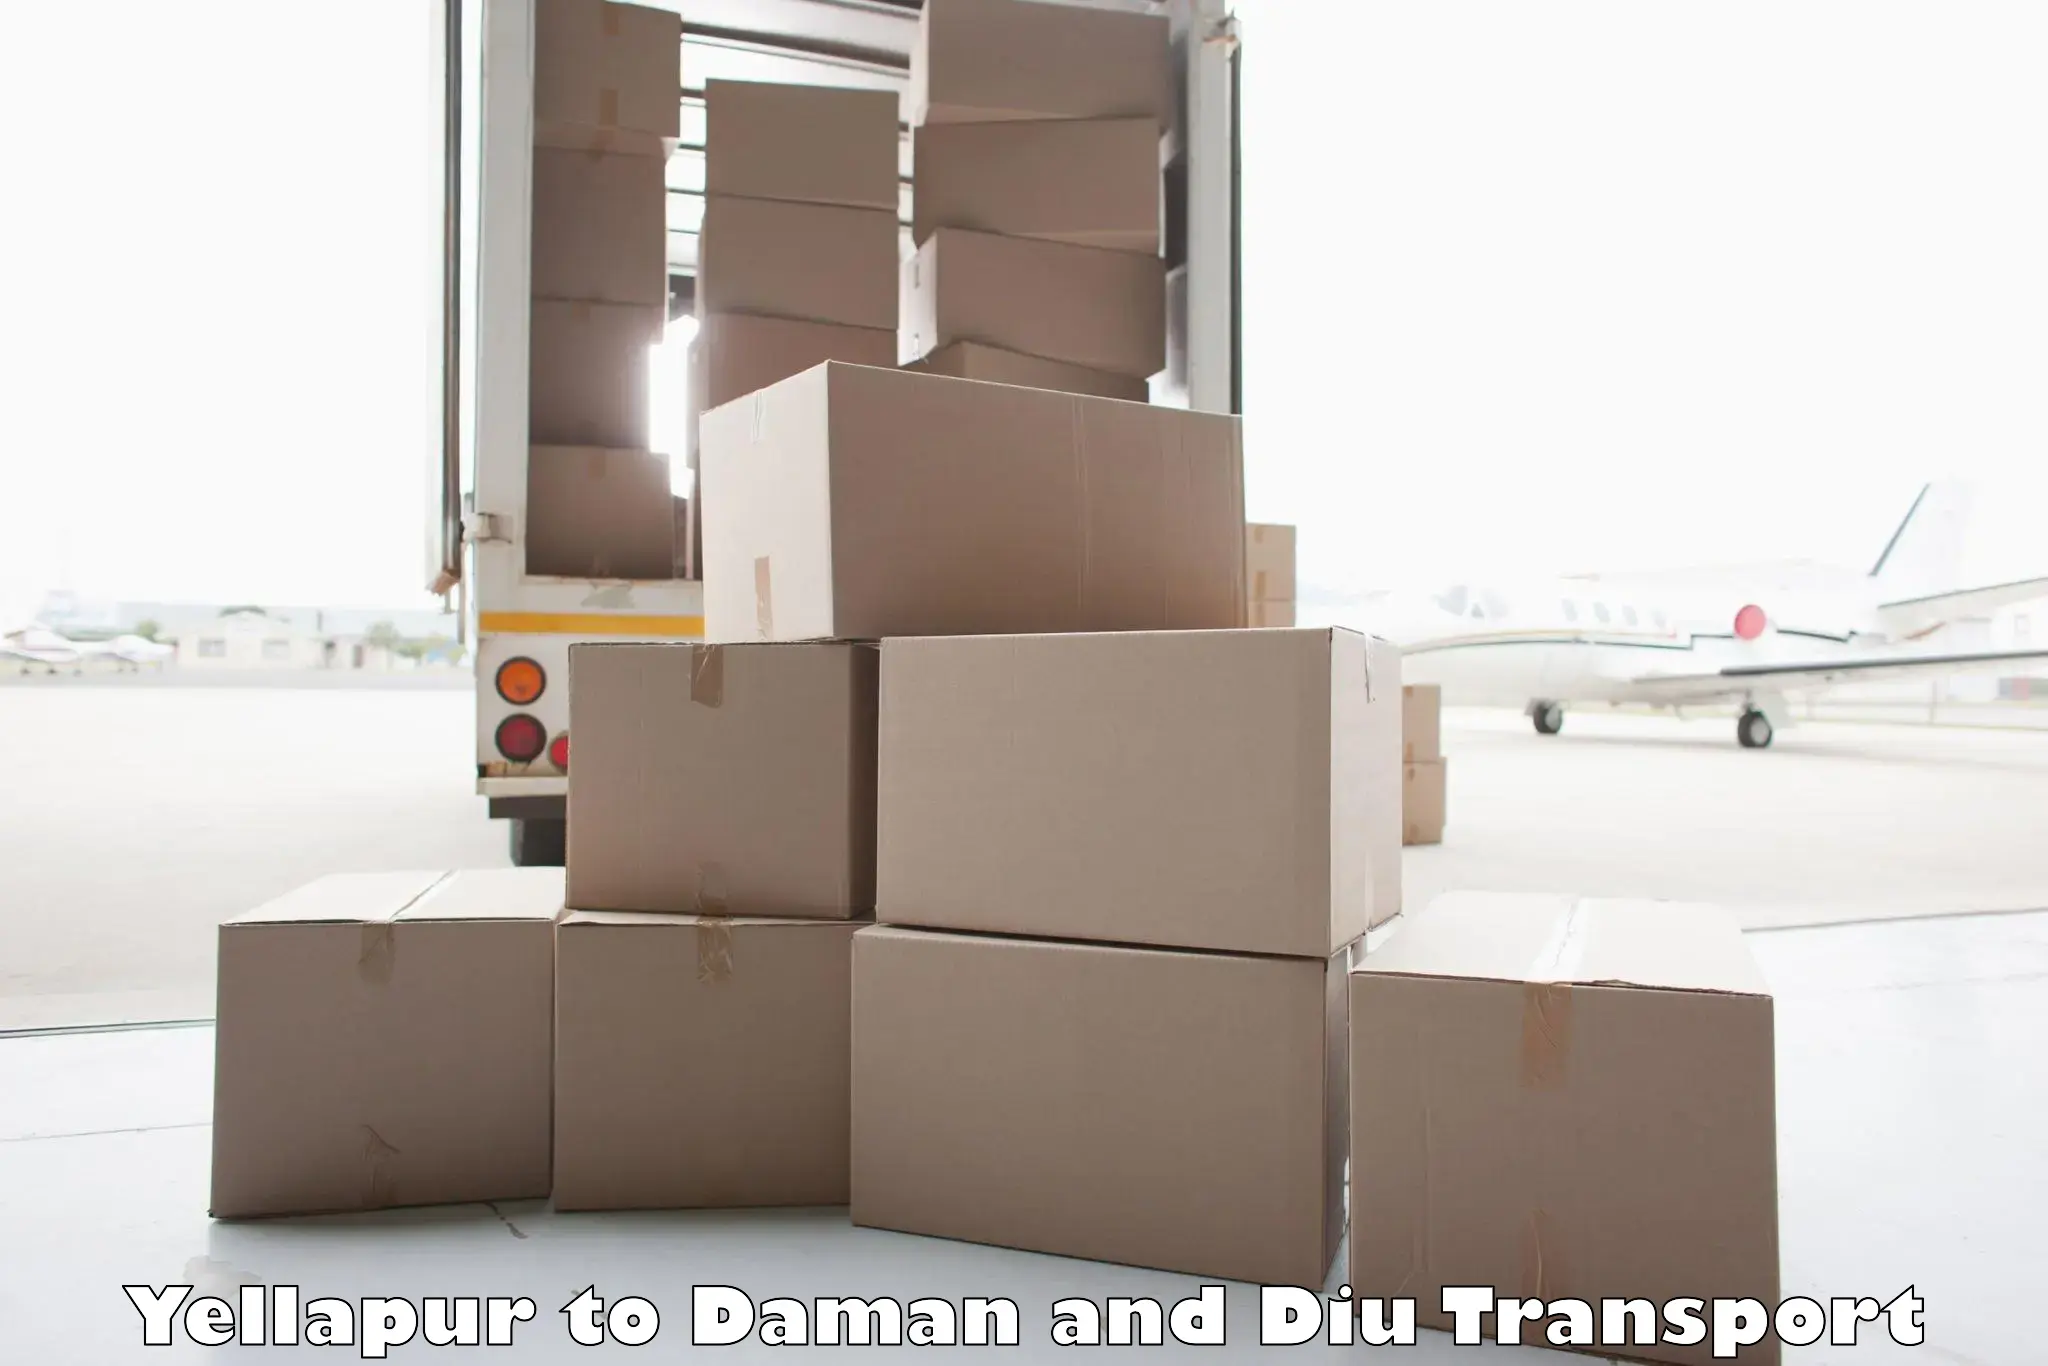 Container transport service Yellapur to Daman and Diu